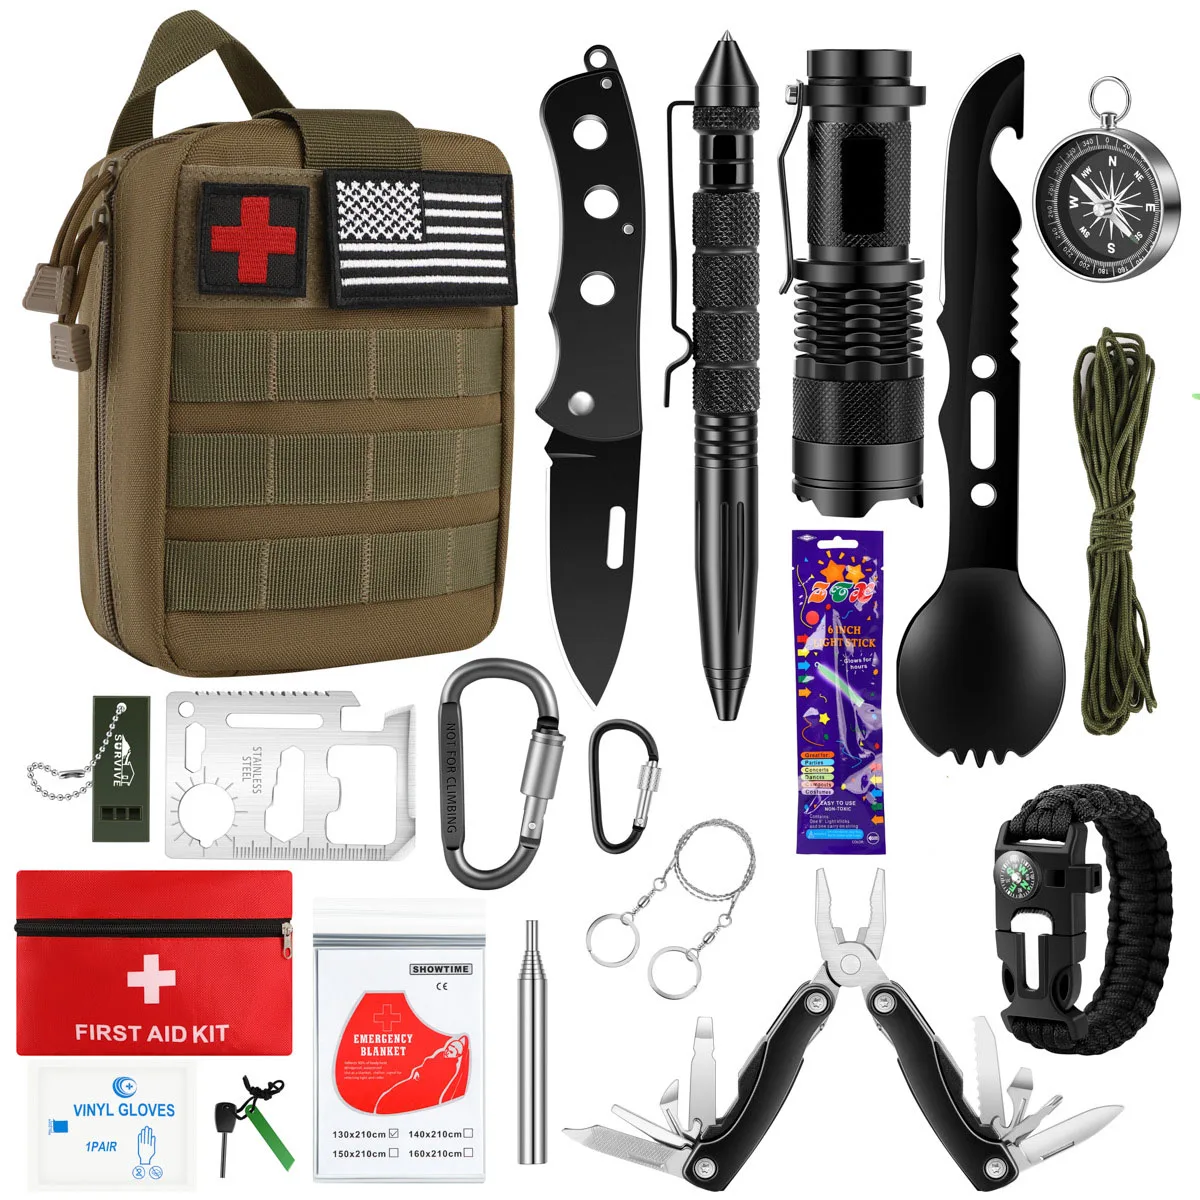 

Safety Emergency Pack With Bag Camping Safety Emergency Pack Camping Hiking Backpack First Aid Survival Kit backpack, Green